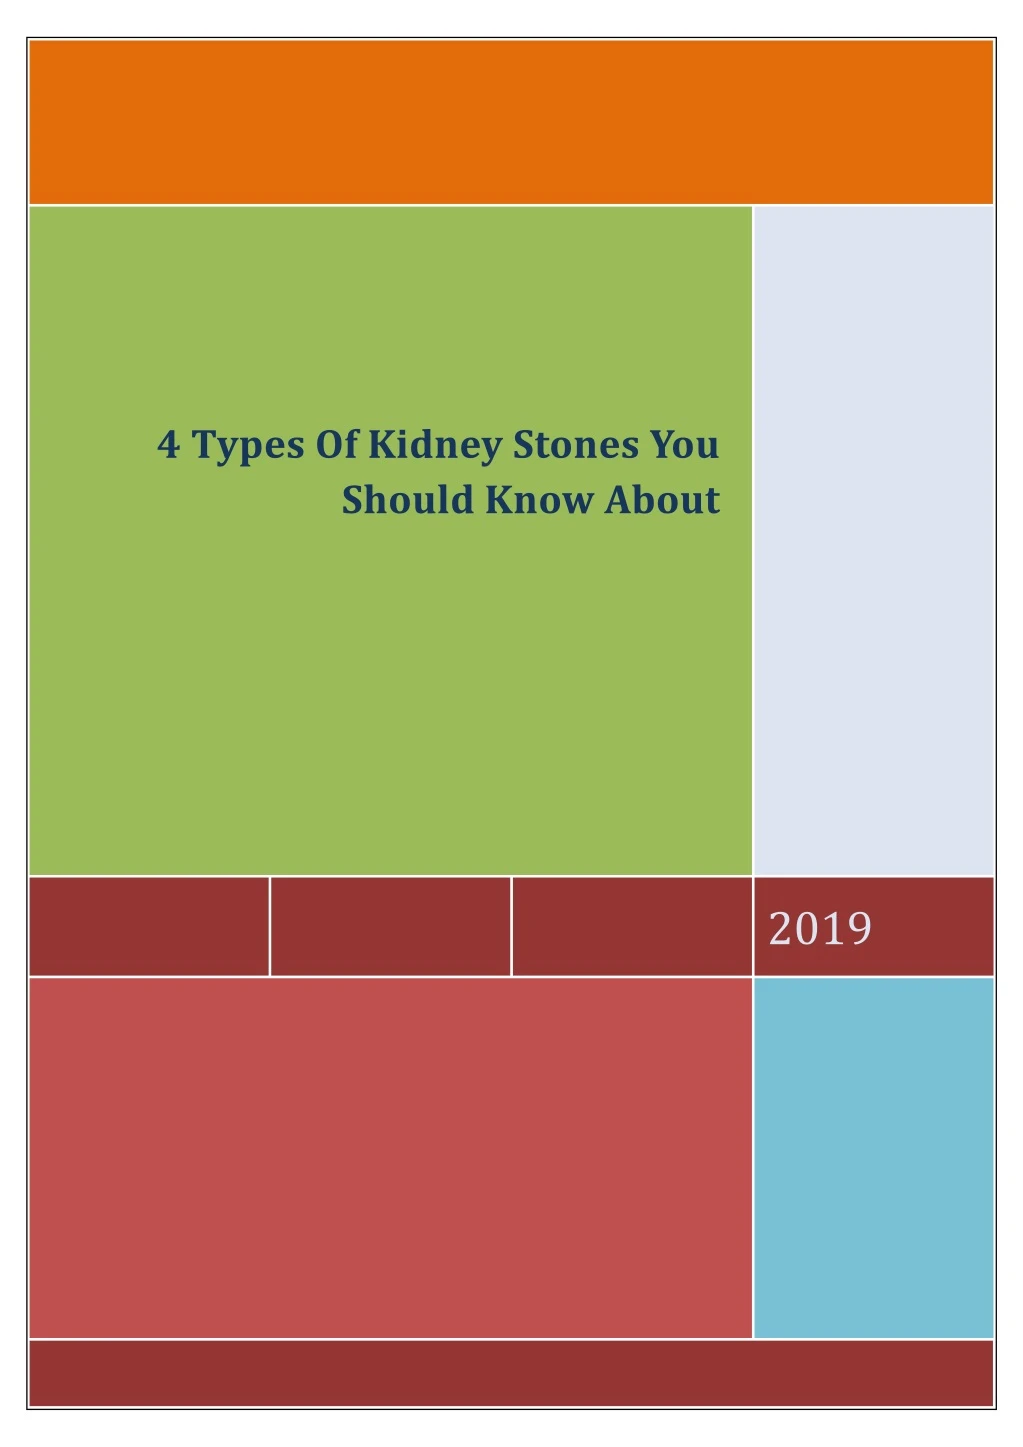 4 types of kidney stones you should know about